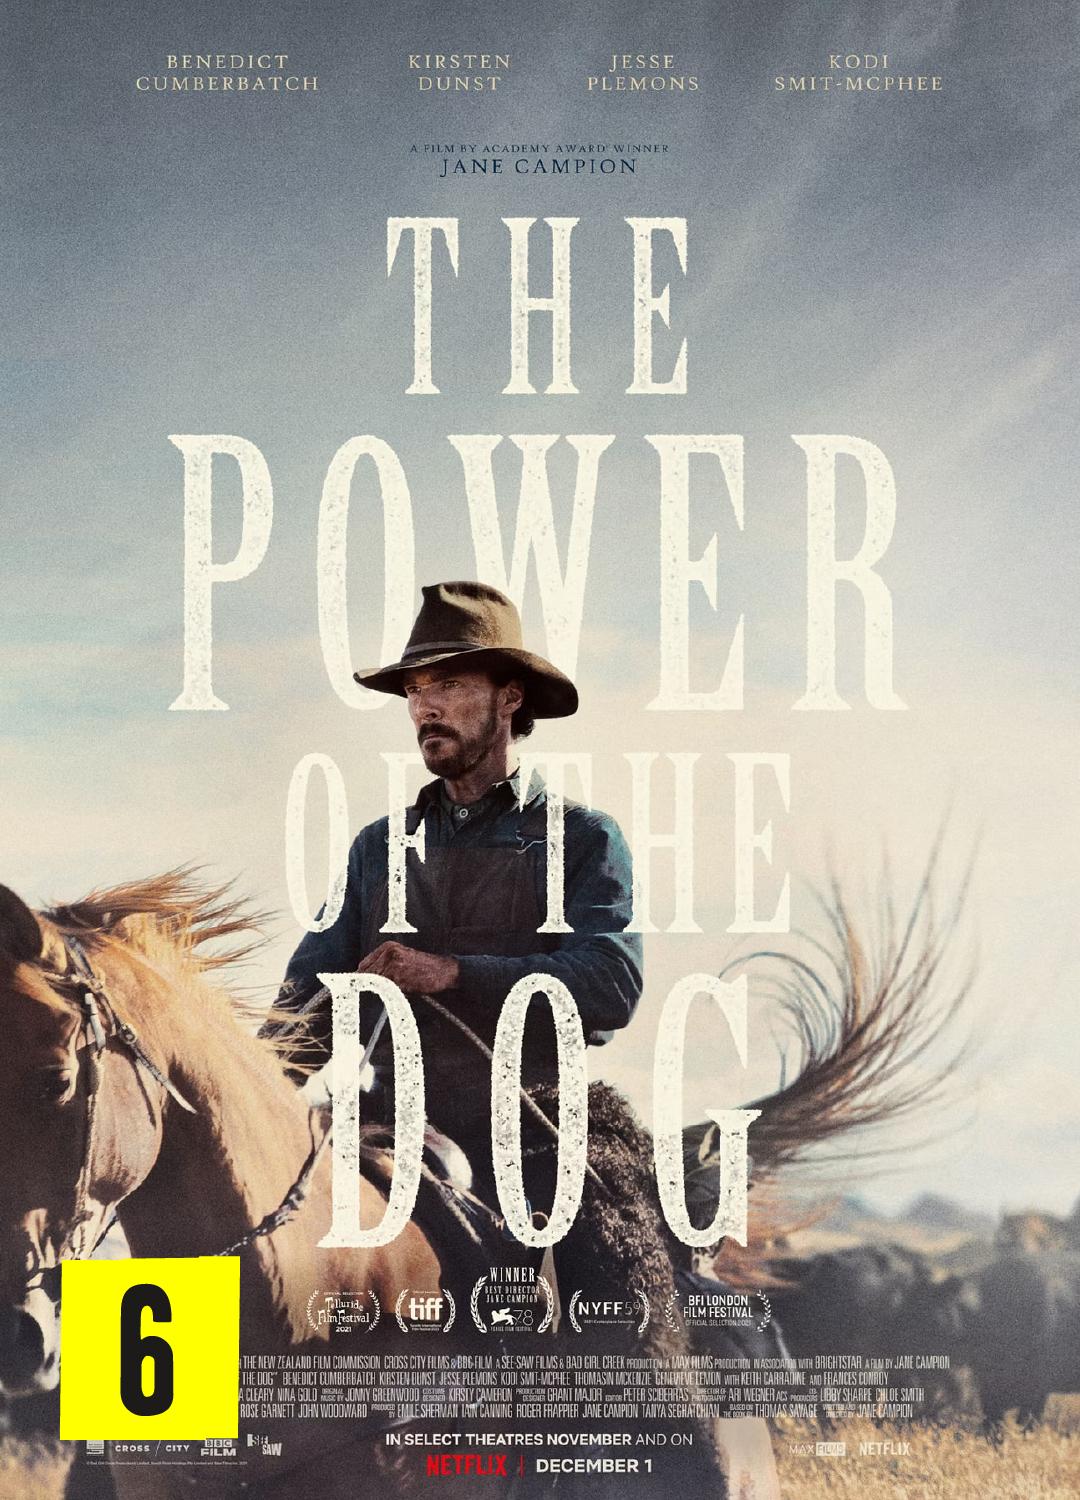 The Power Of The Dog